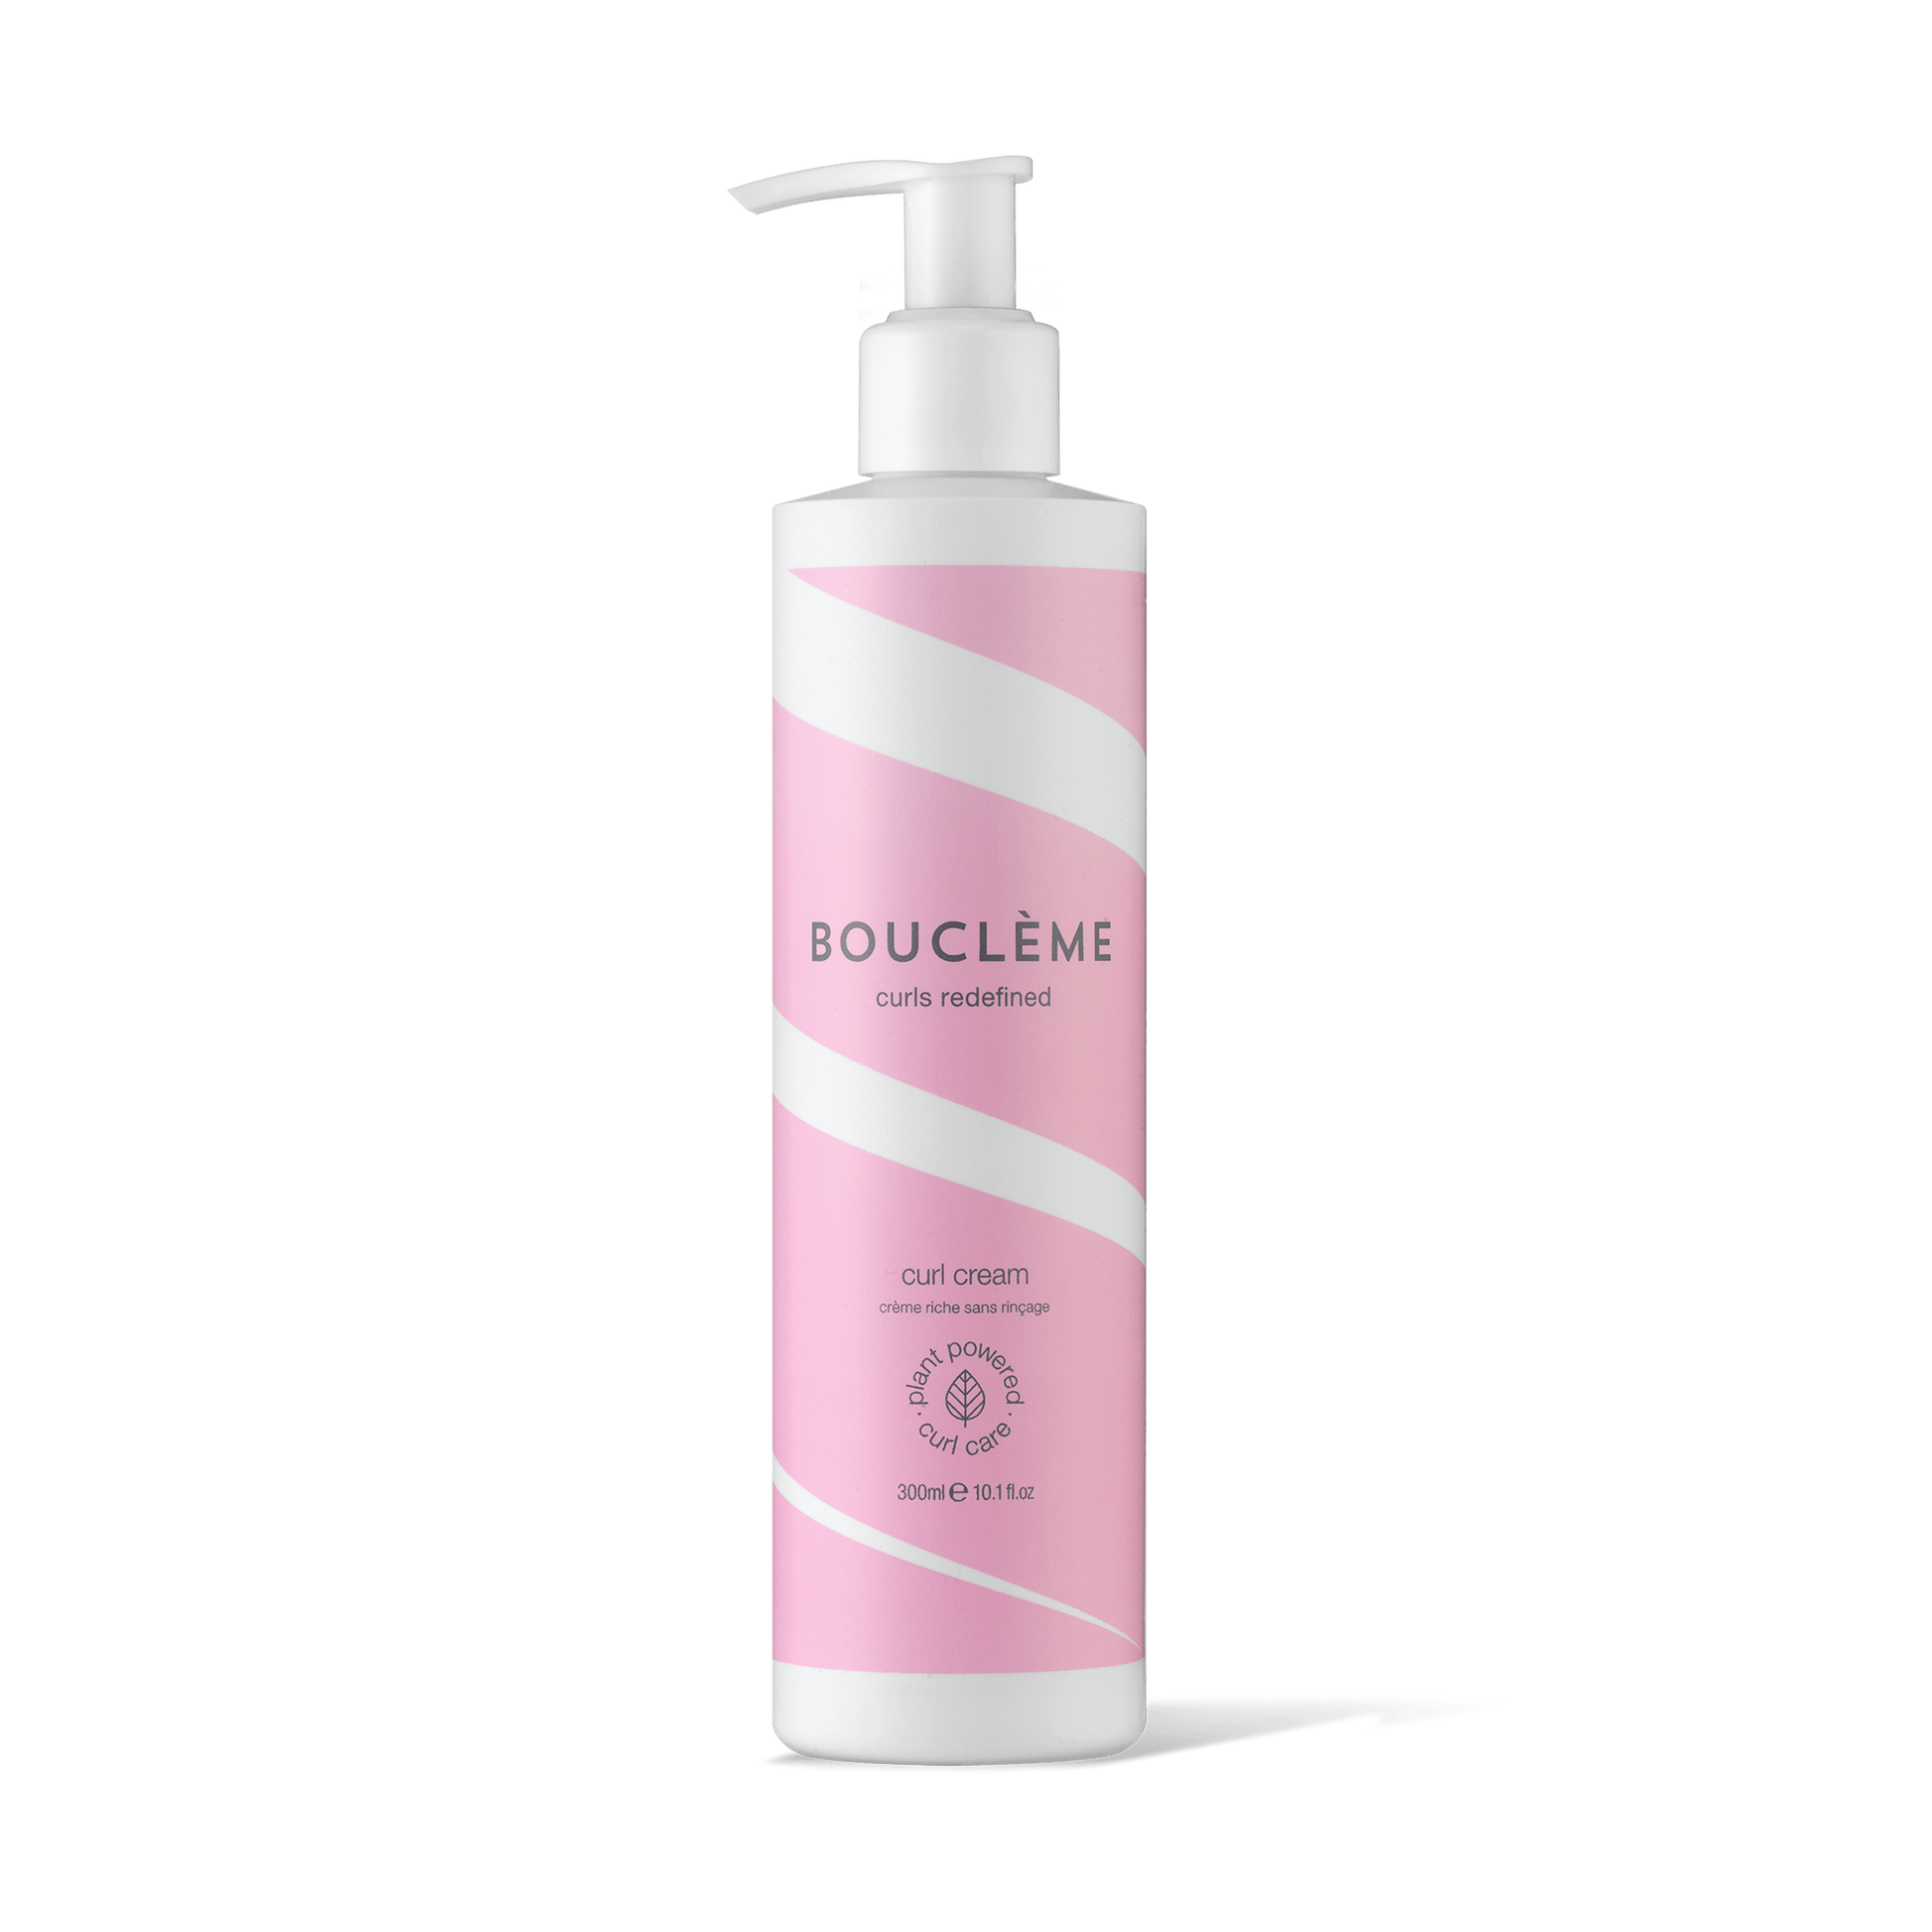 This leave in curl cream offers unrivalled moisture for perfectly defined curls.